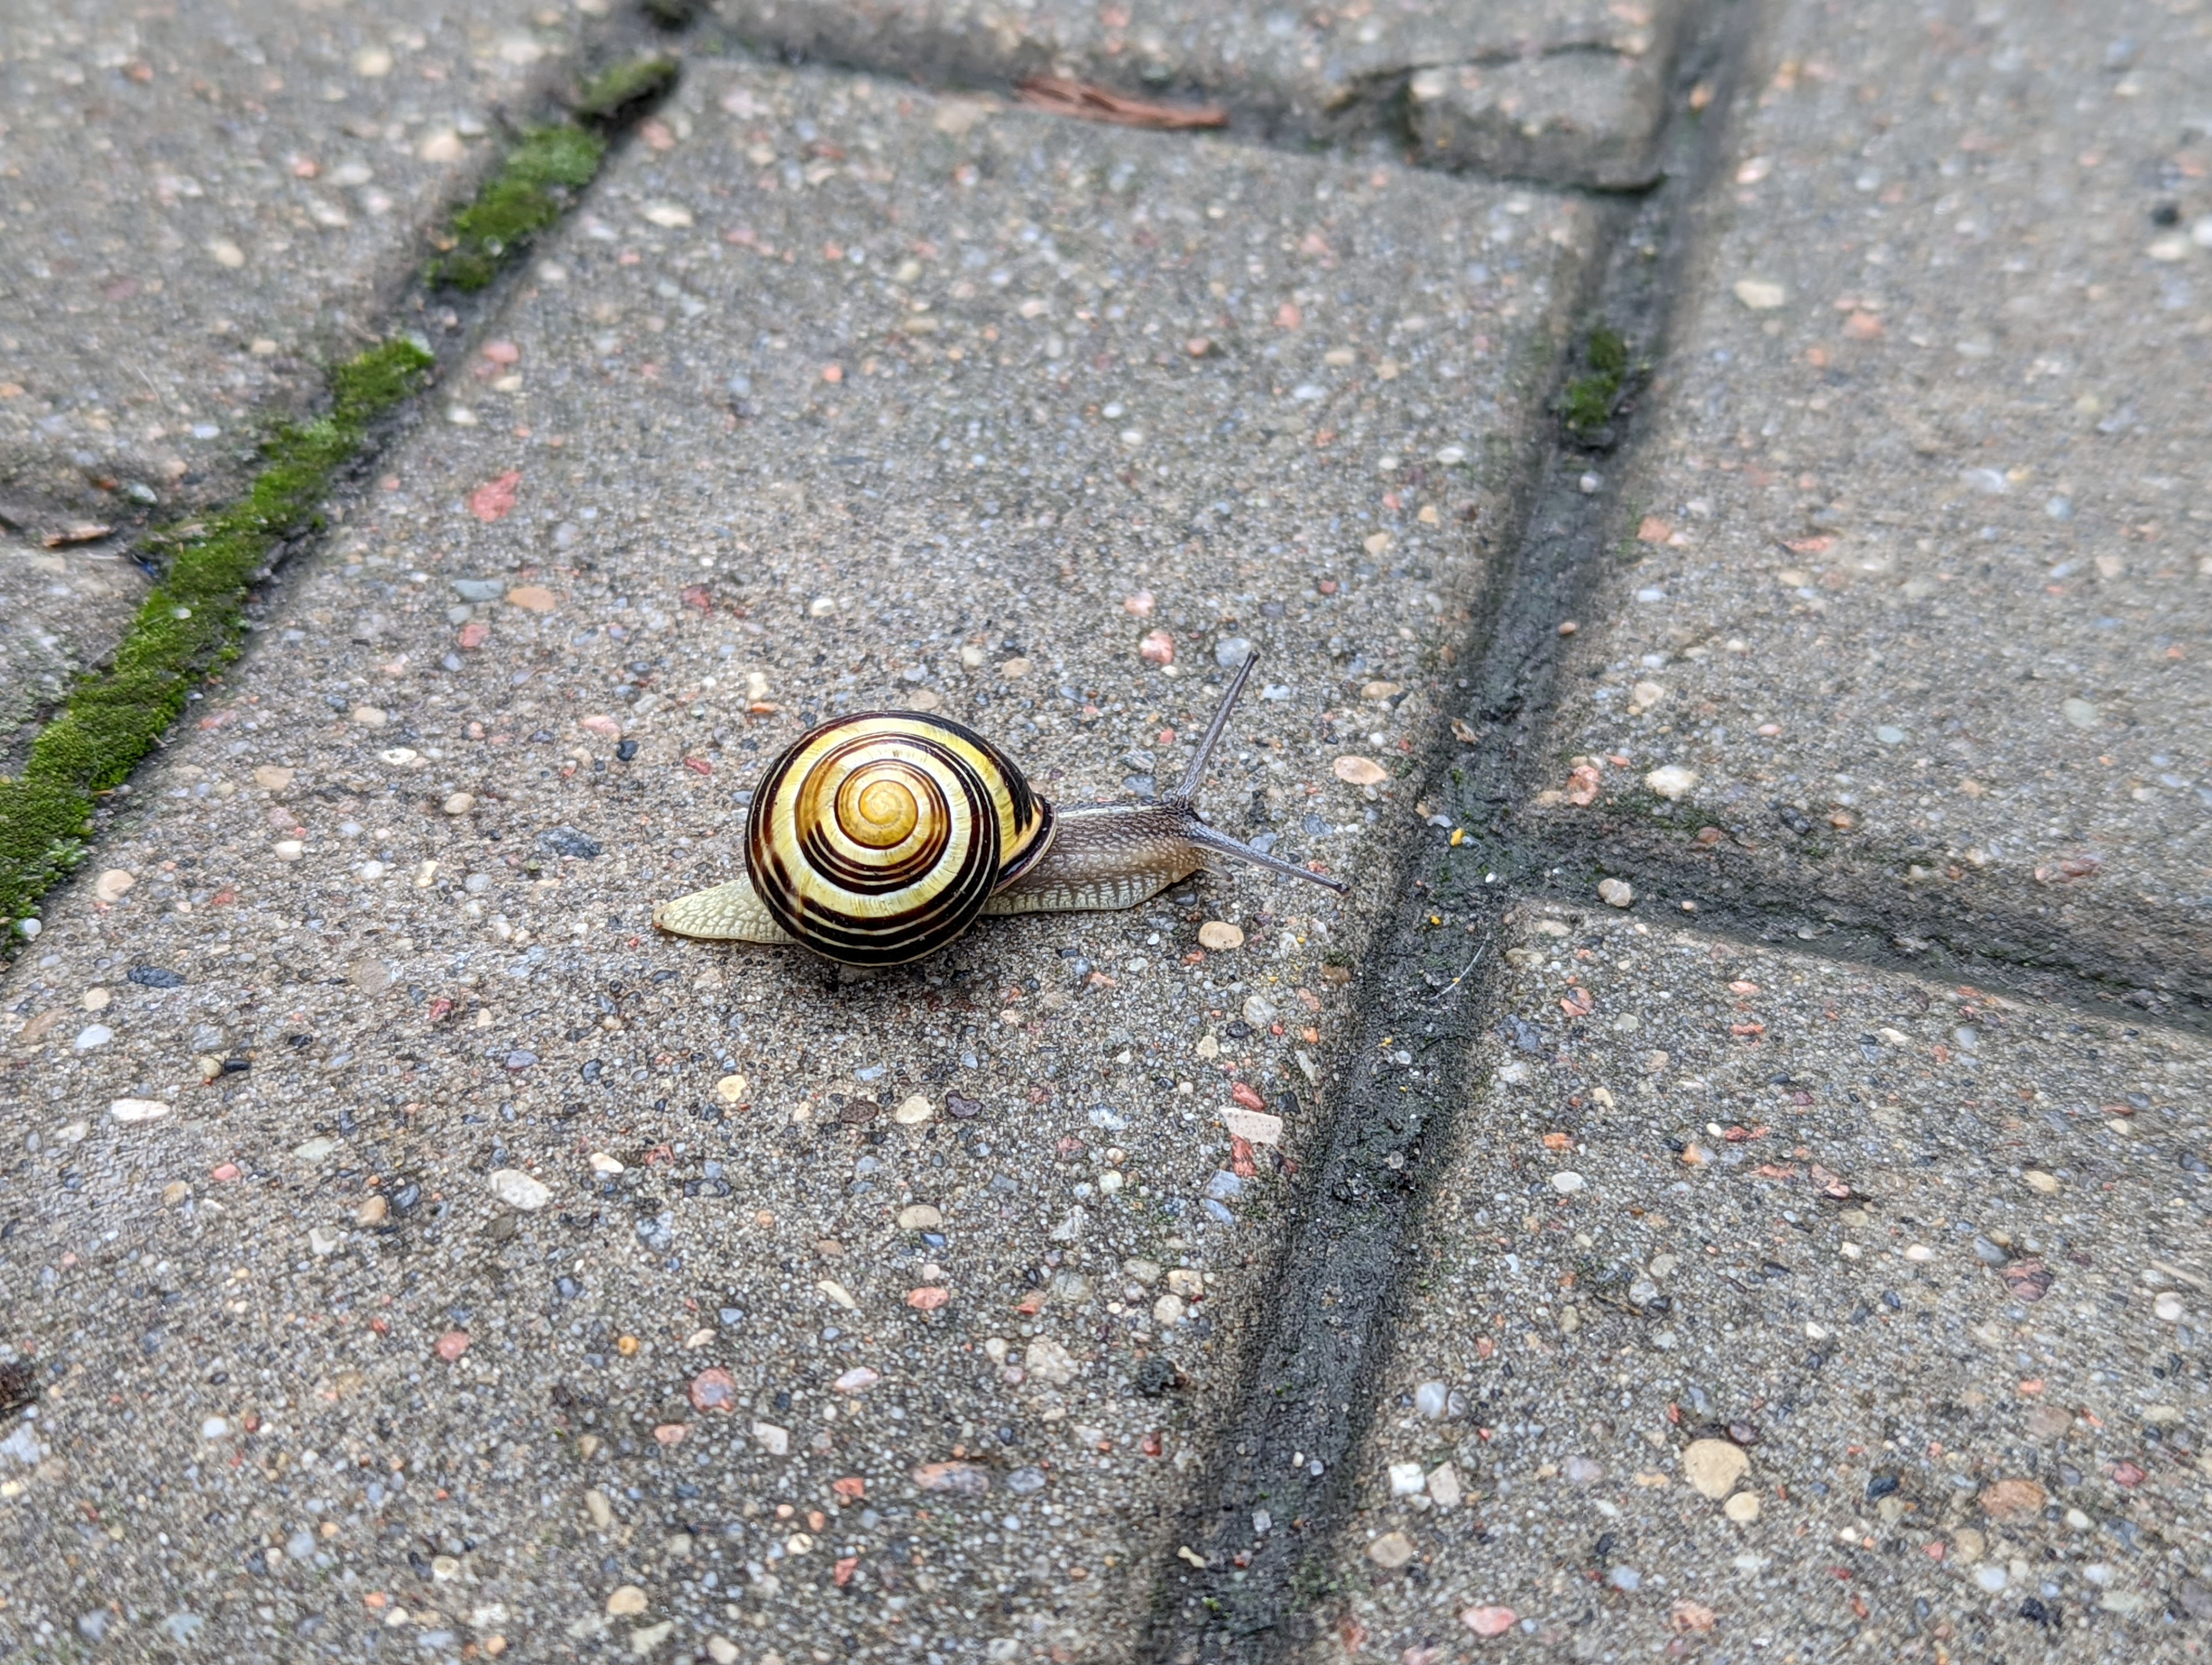 Saturday it rained a bit before and during my run. The snails here are pretty cool!